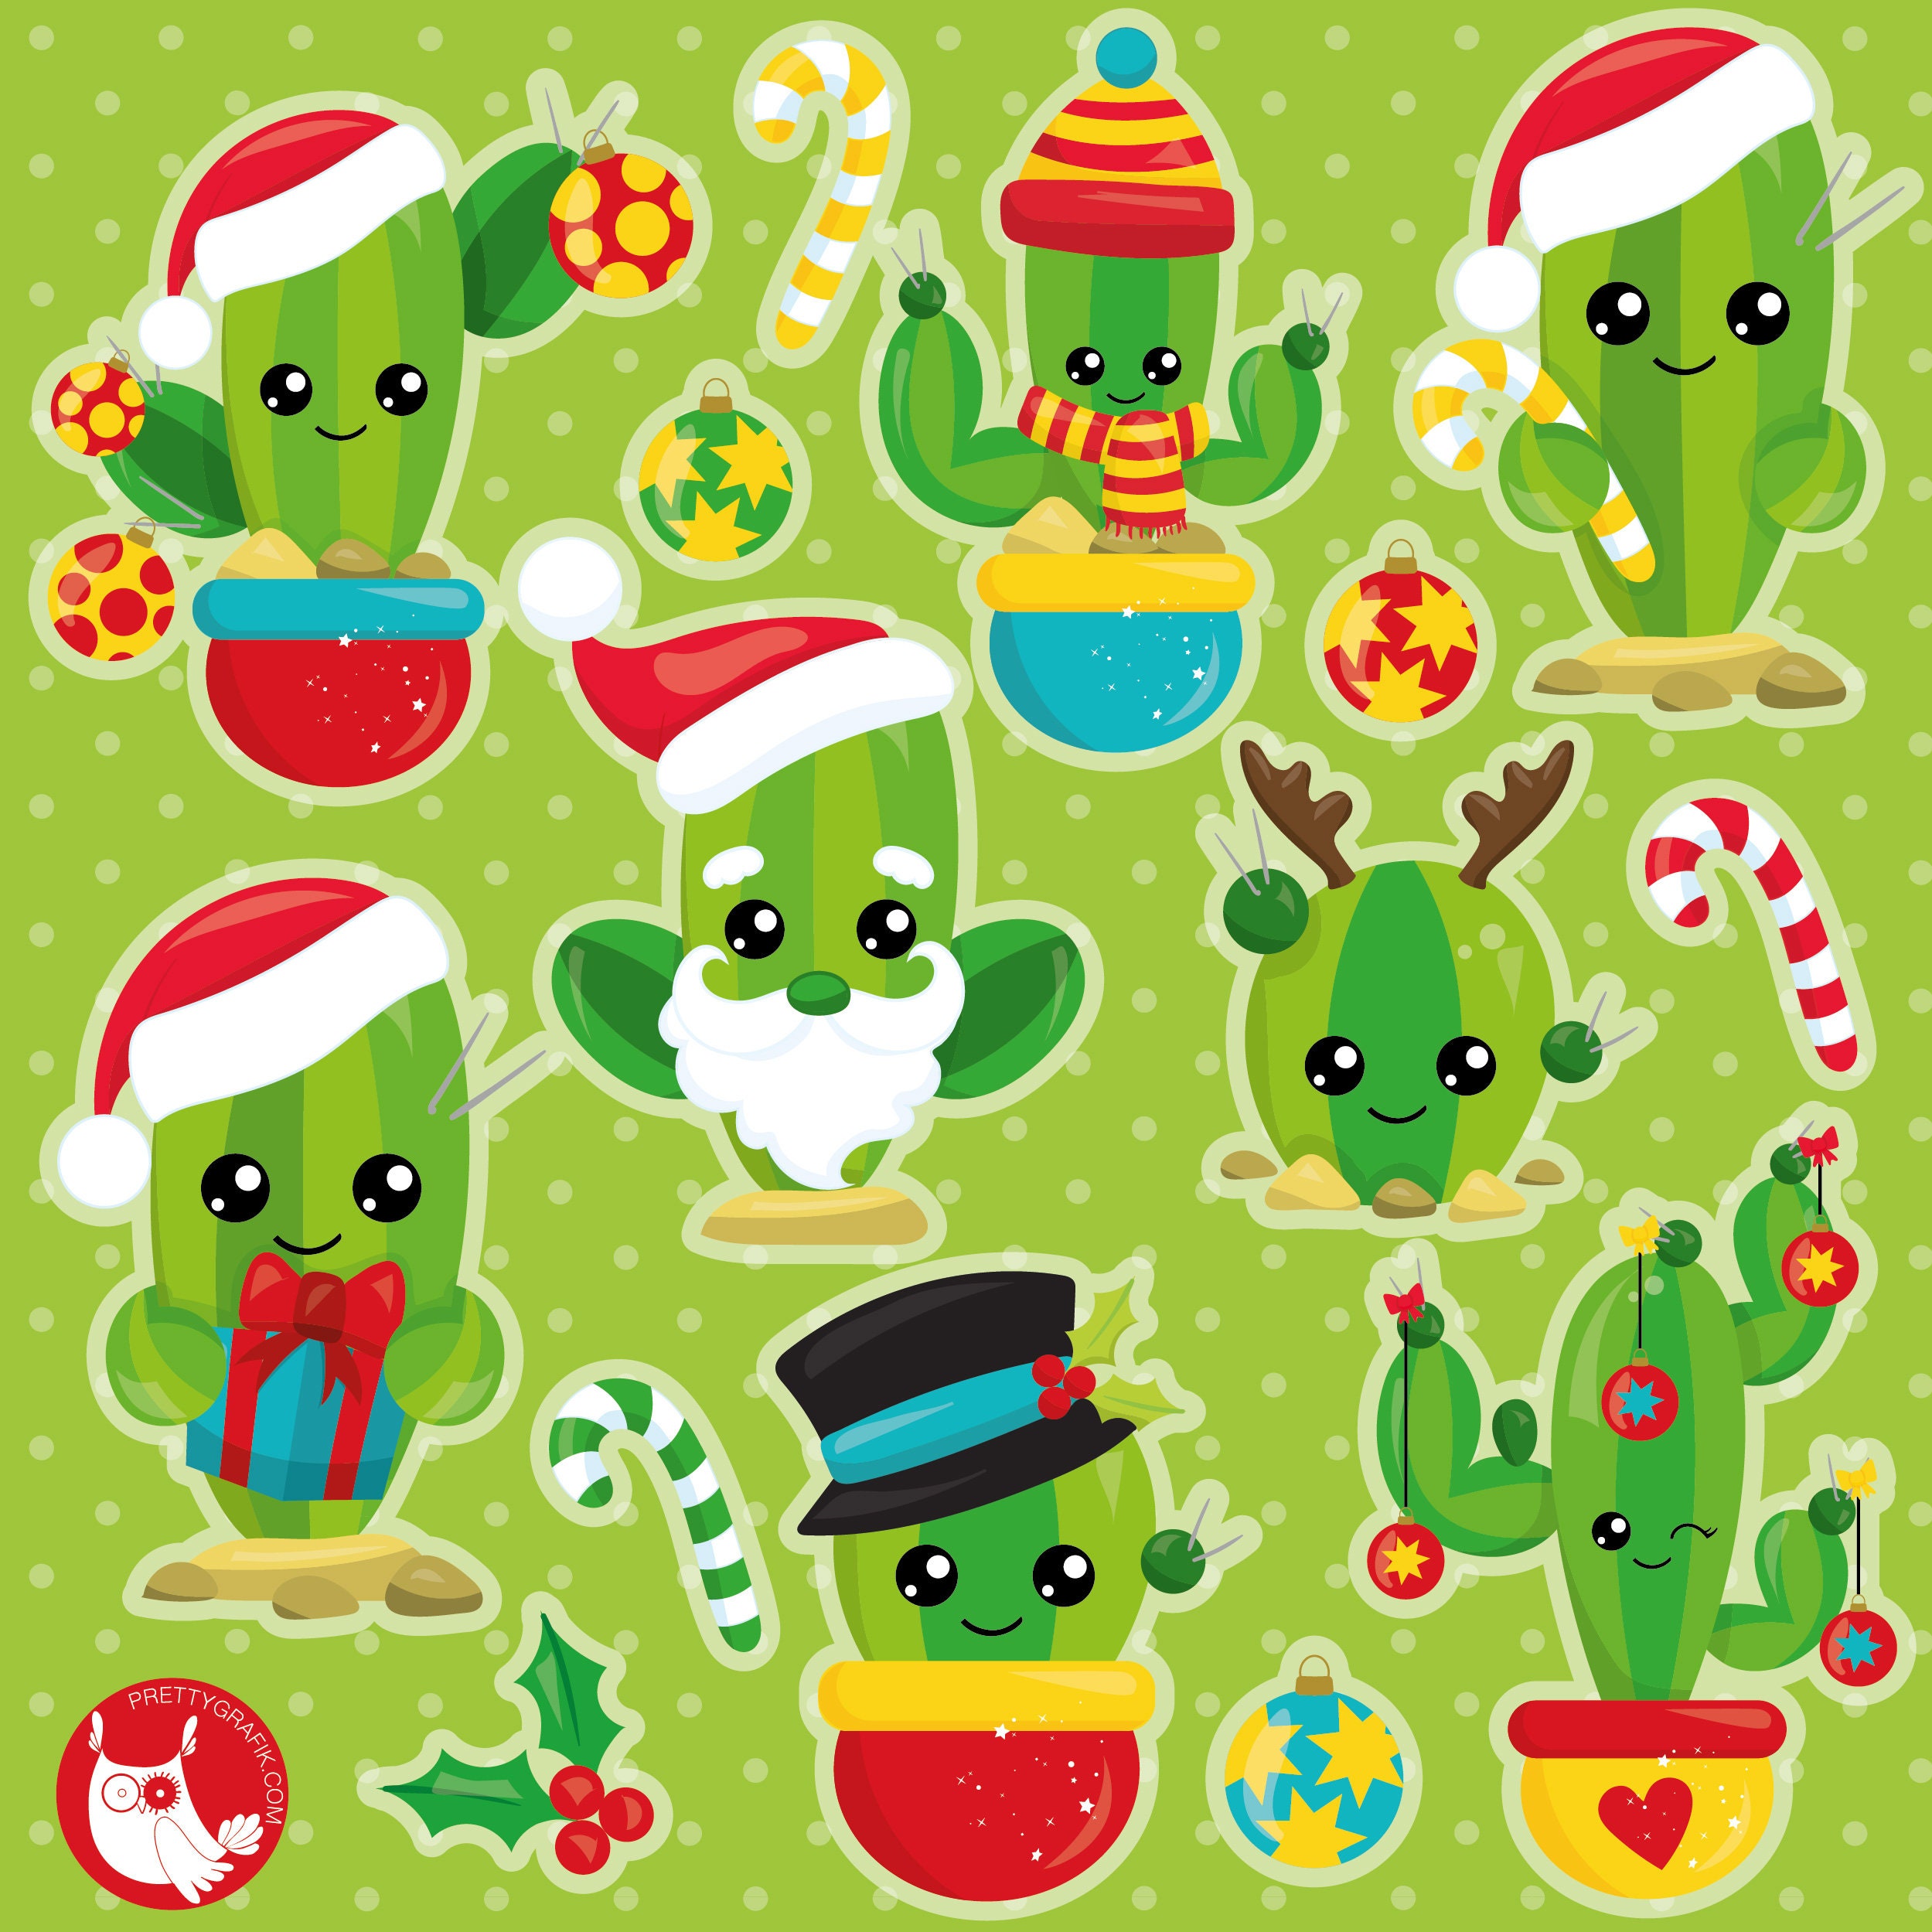 LiGhtEd ChristMas CaCTus Clipart*clipart*png format*digital download**300 dpi